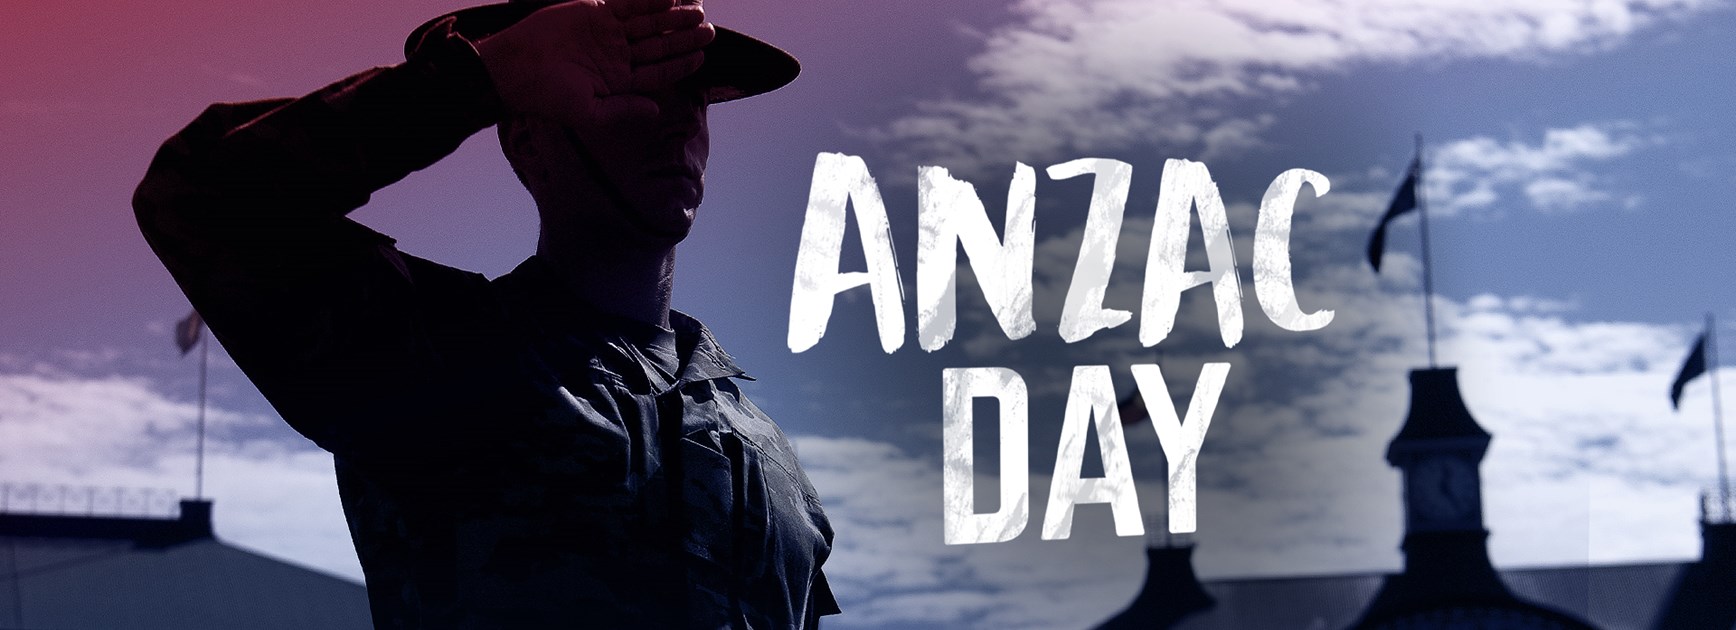 Anzac Day Tickets On Sale Now